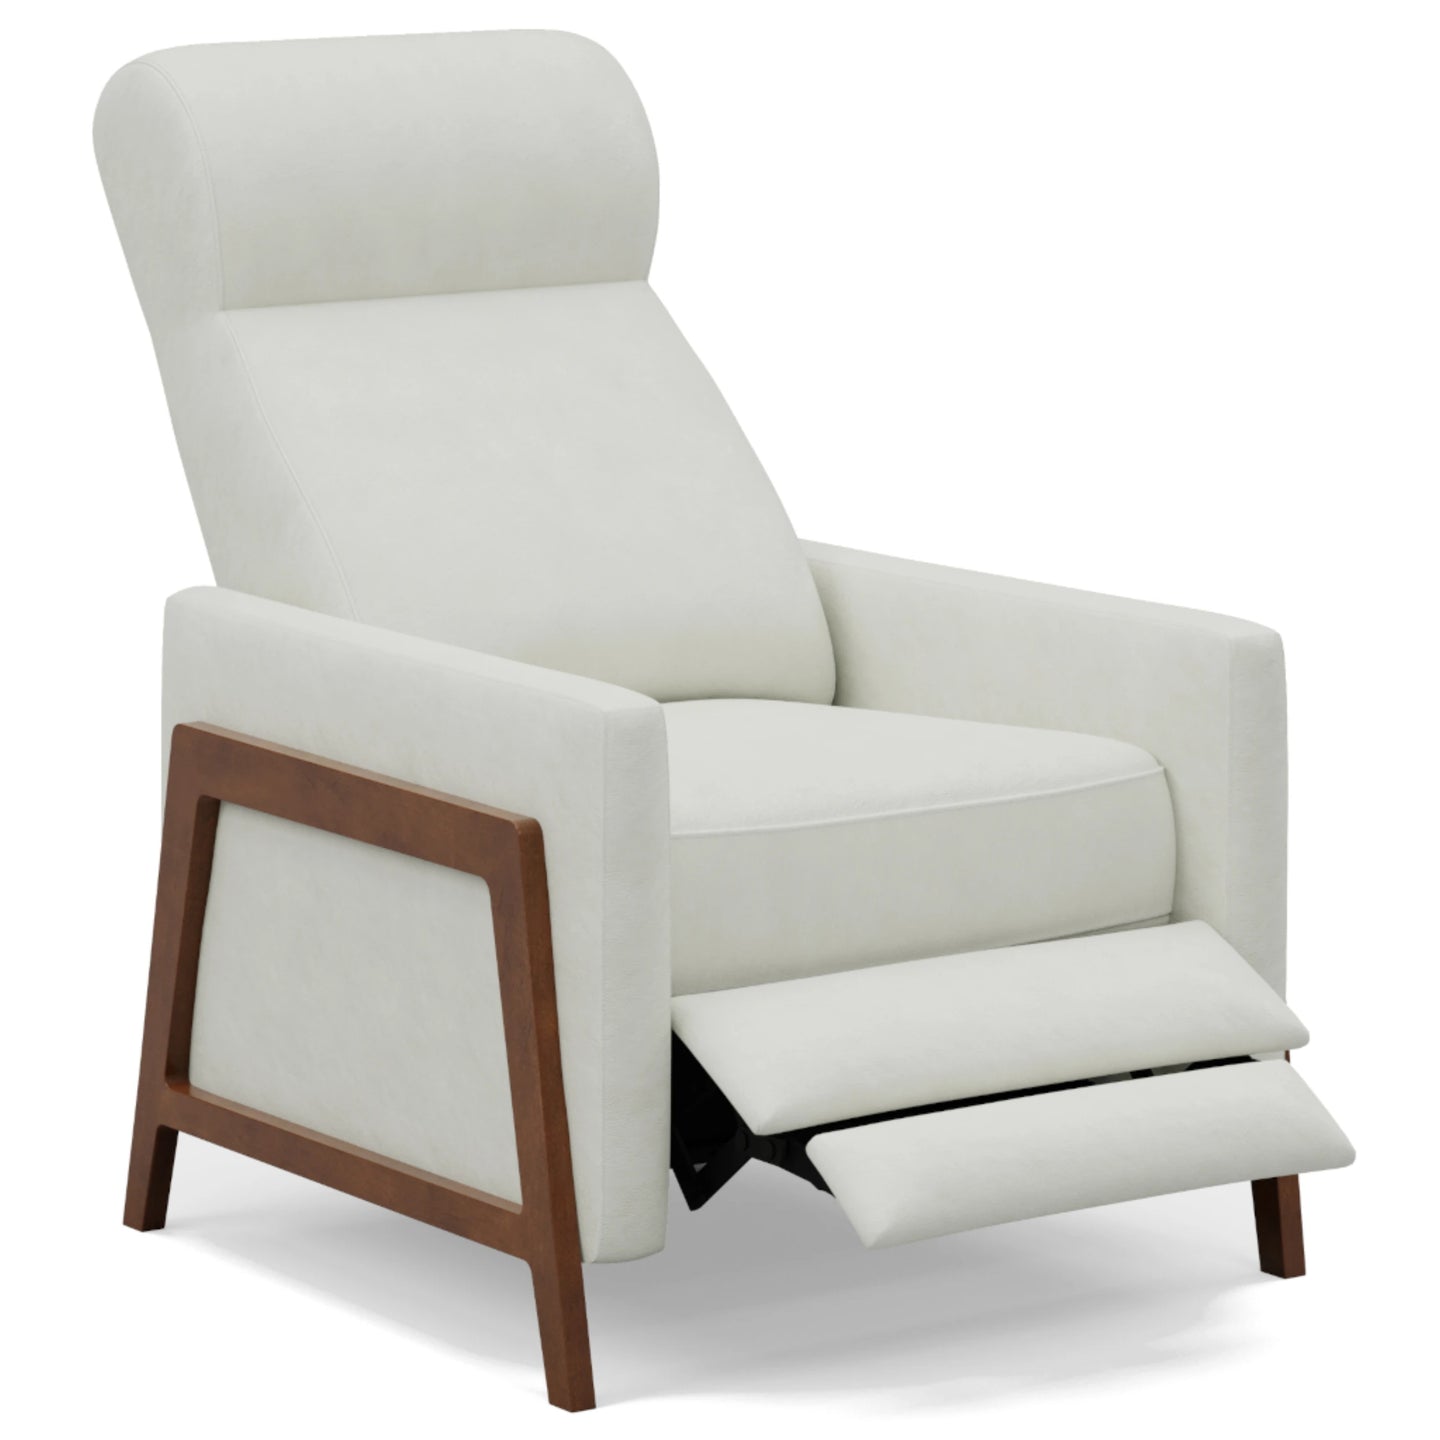 Sunset Trading Edge Pushback Leather Recliner | Manual Reclining Chair | Thin Track Arms | Pearl White